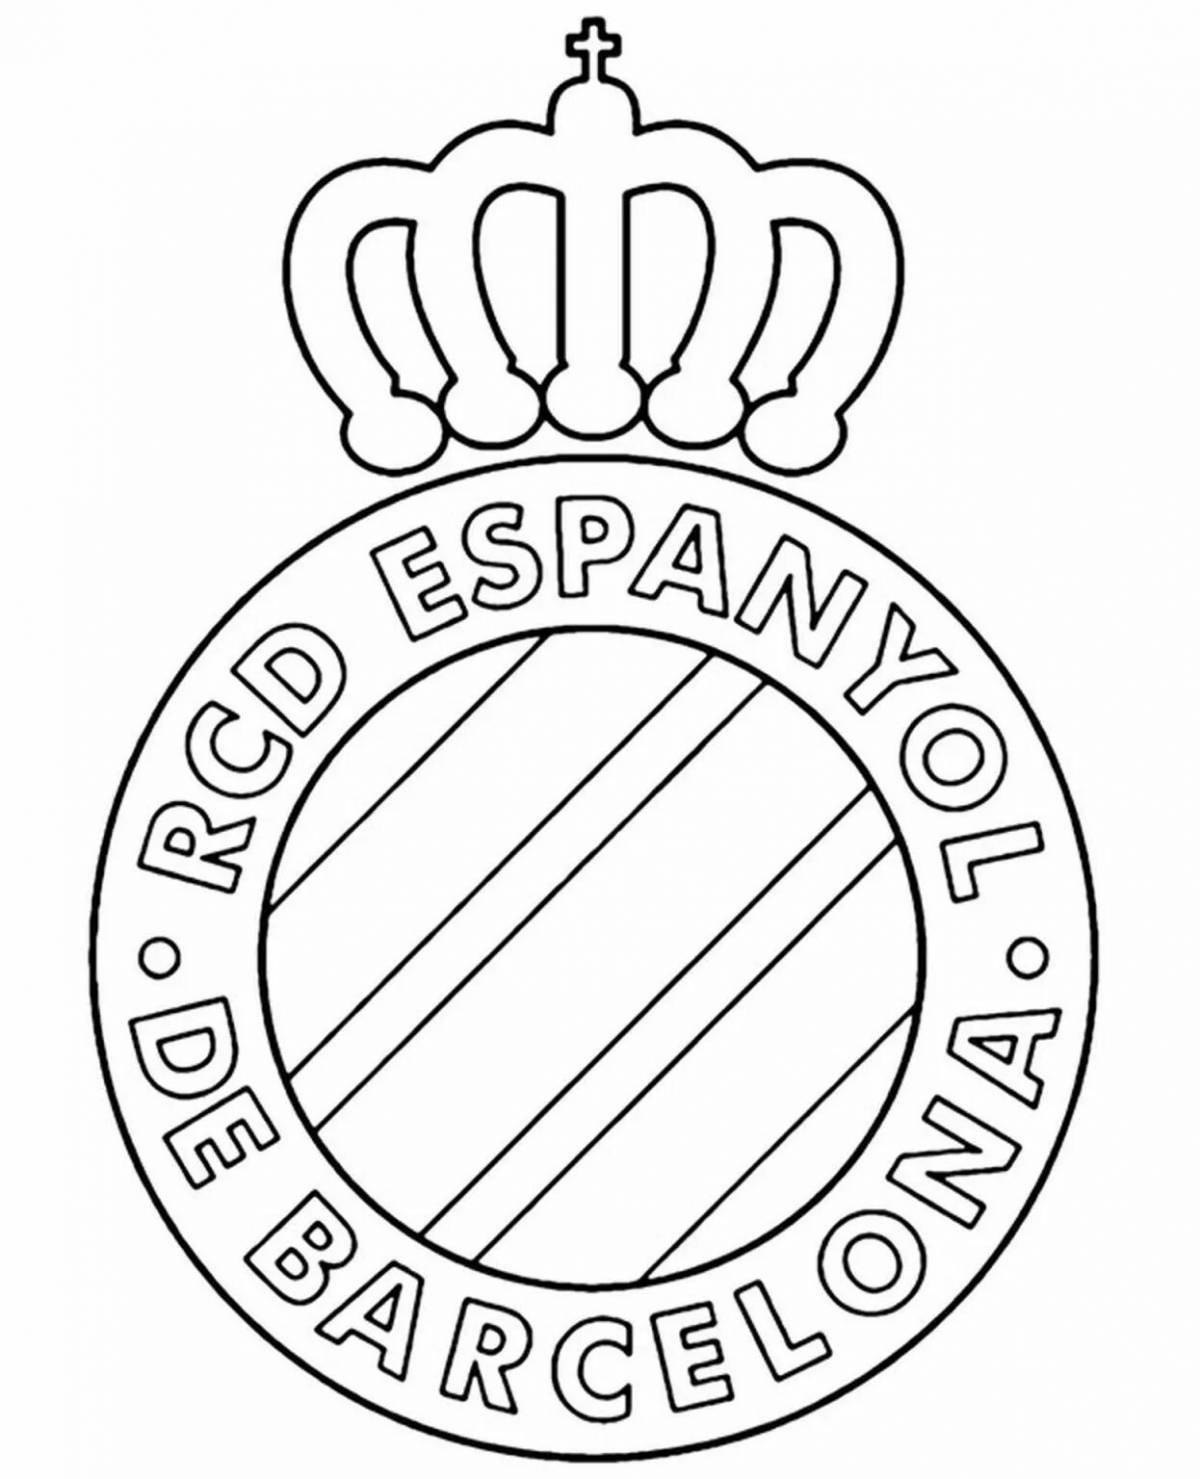 Coloring book with bold psg logo